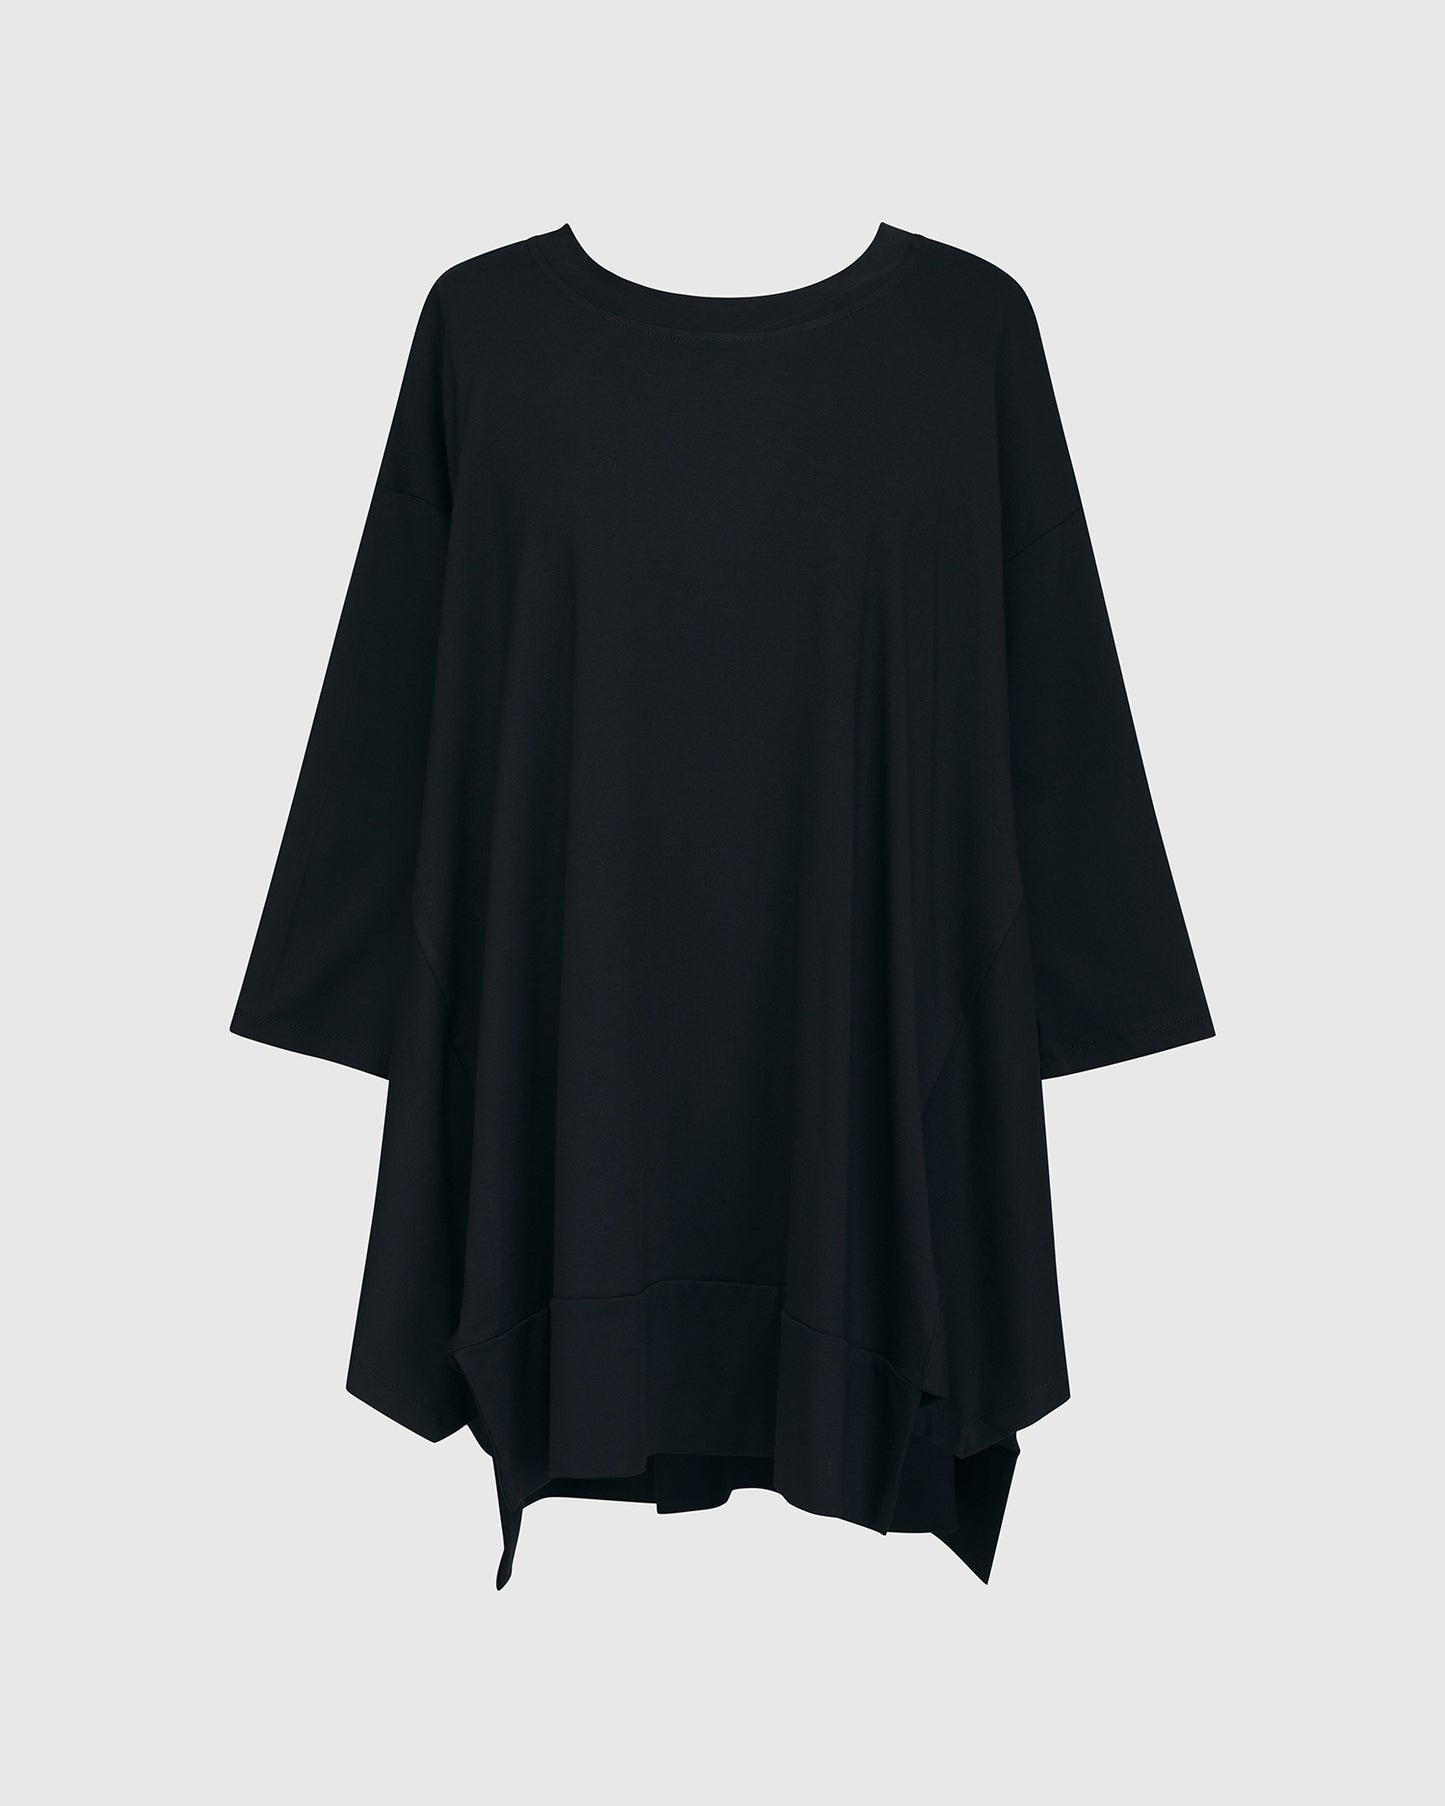 Essential Oversized Trapeze Top, Black by Alembika